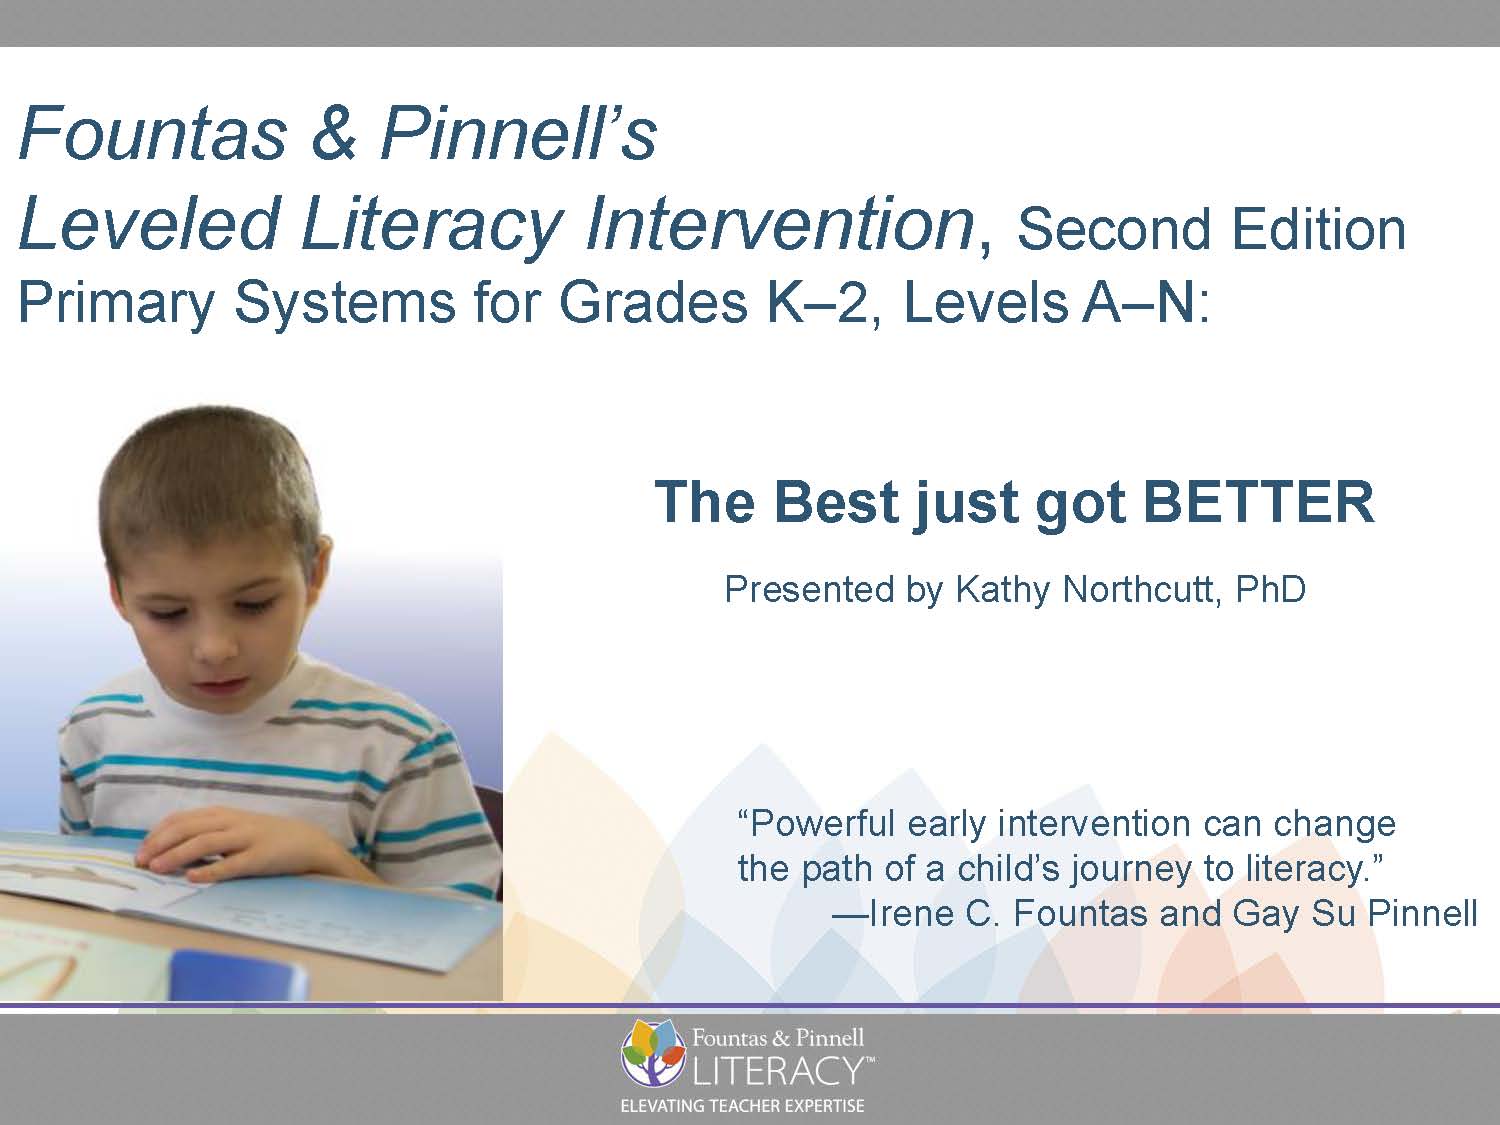 Webinar: Fountas & Pinnell’s Leveled Literacy Intervention, 2nd Edition